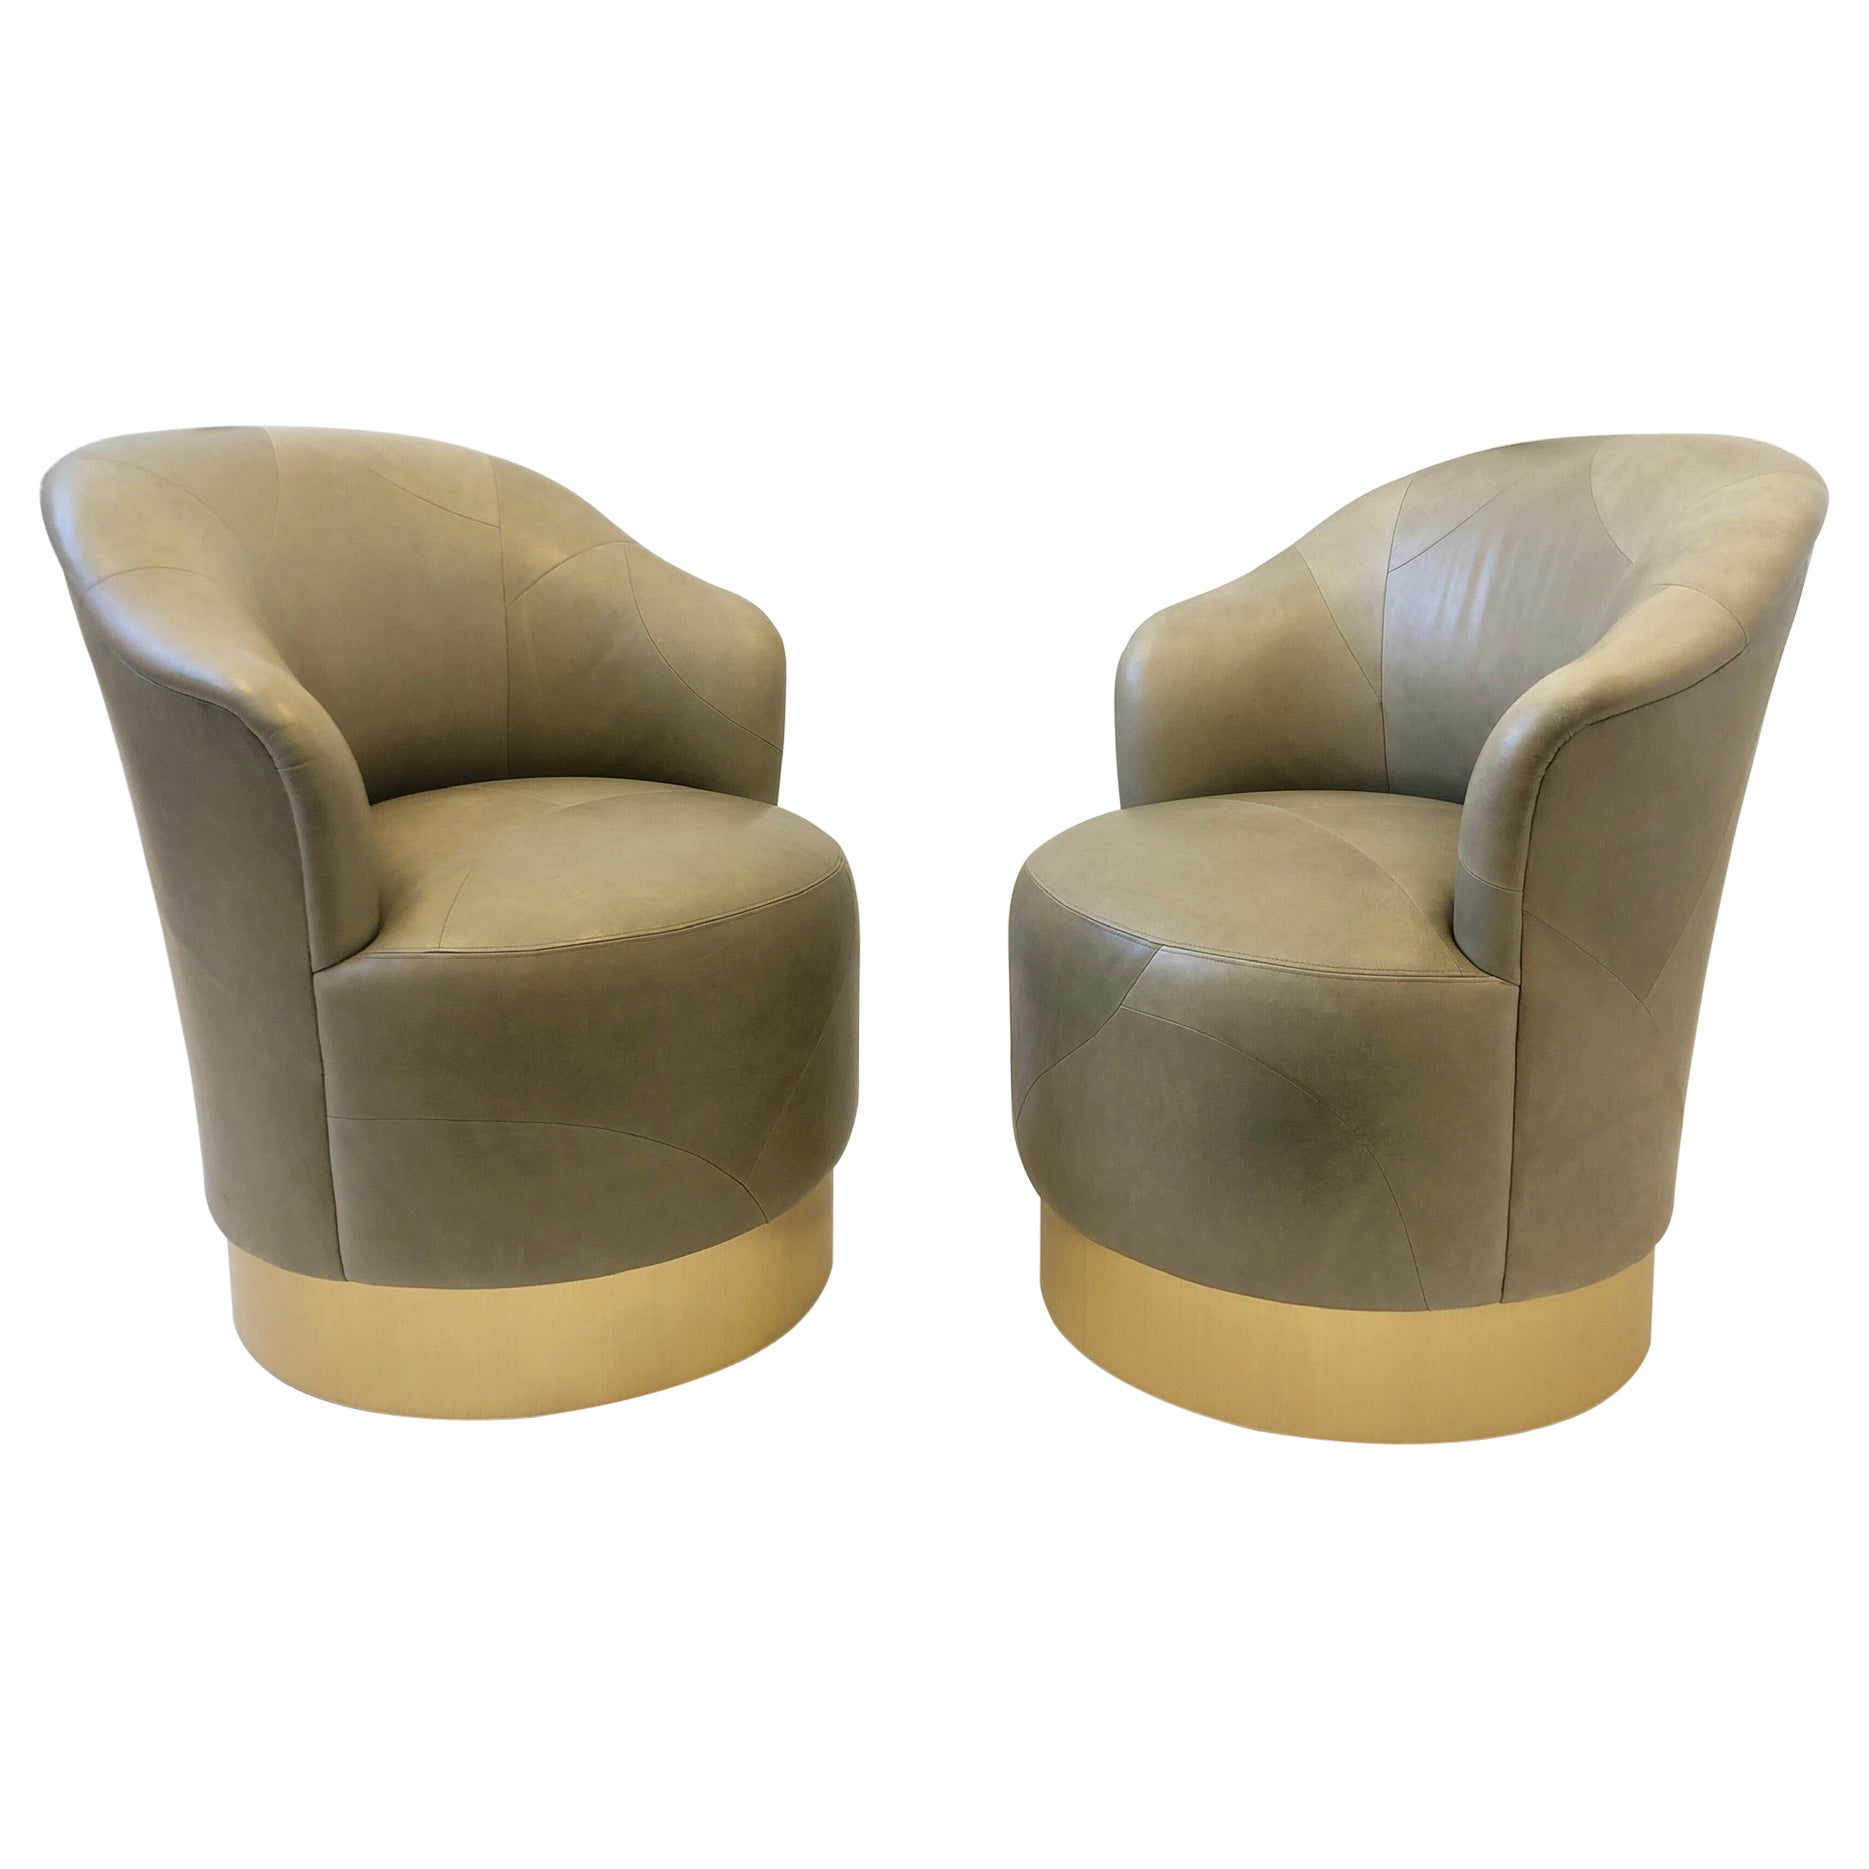 Pair of Brass and Leather Swivel Chairs by J. Robert Scott